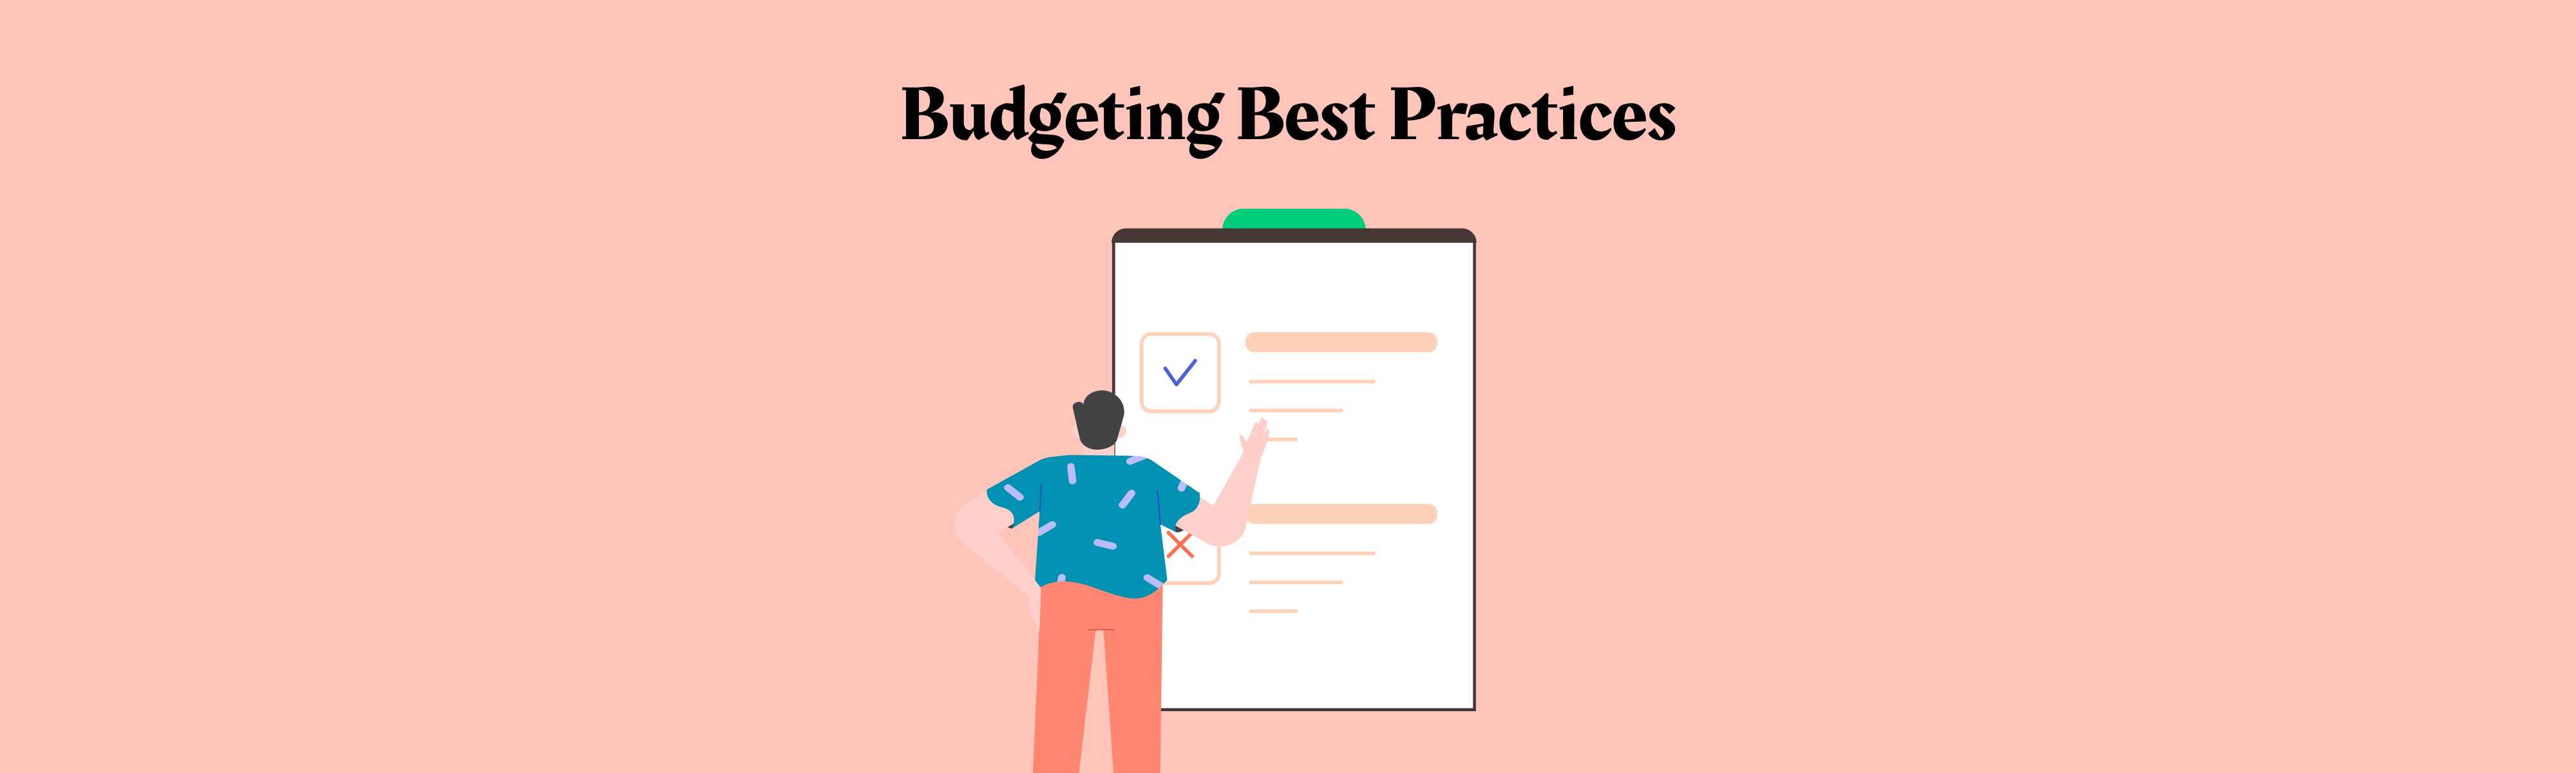 budgeting best practices